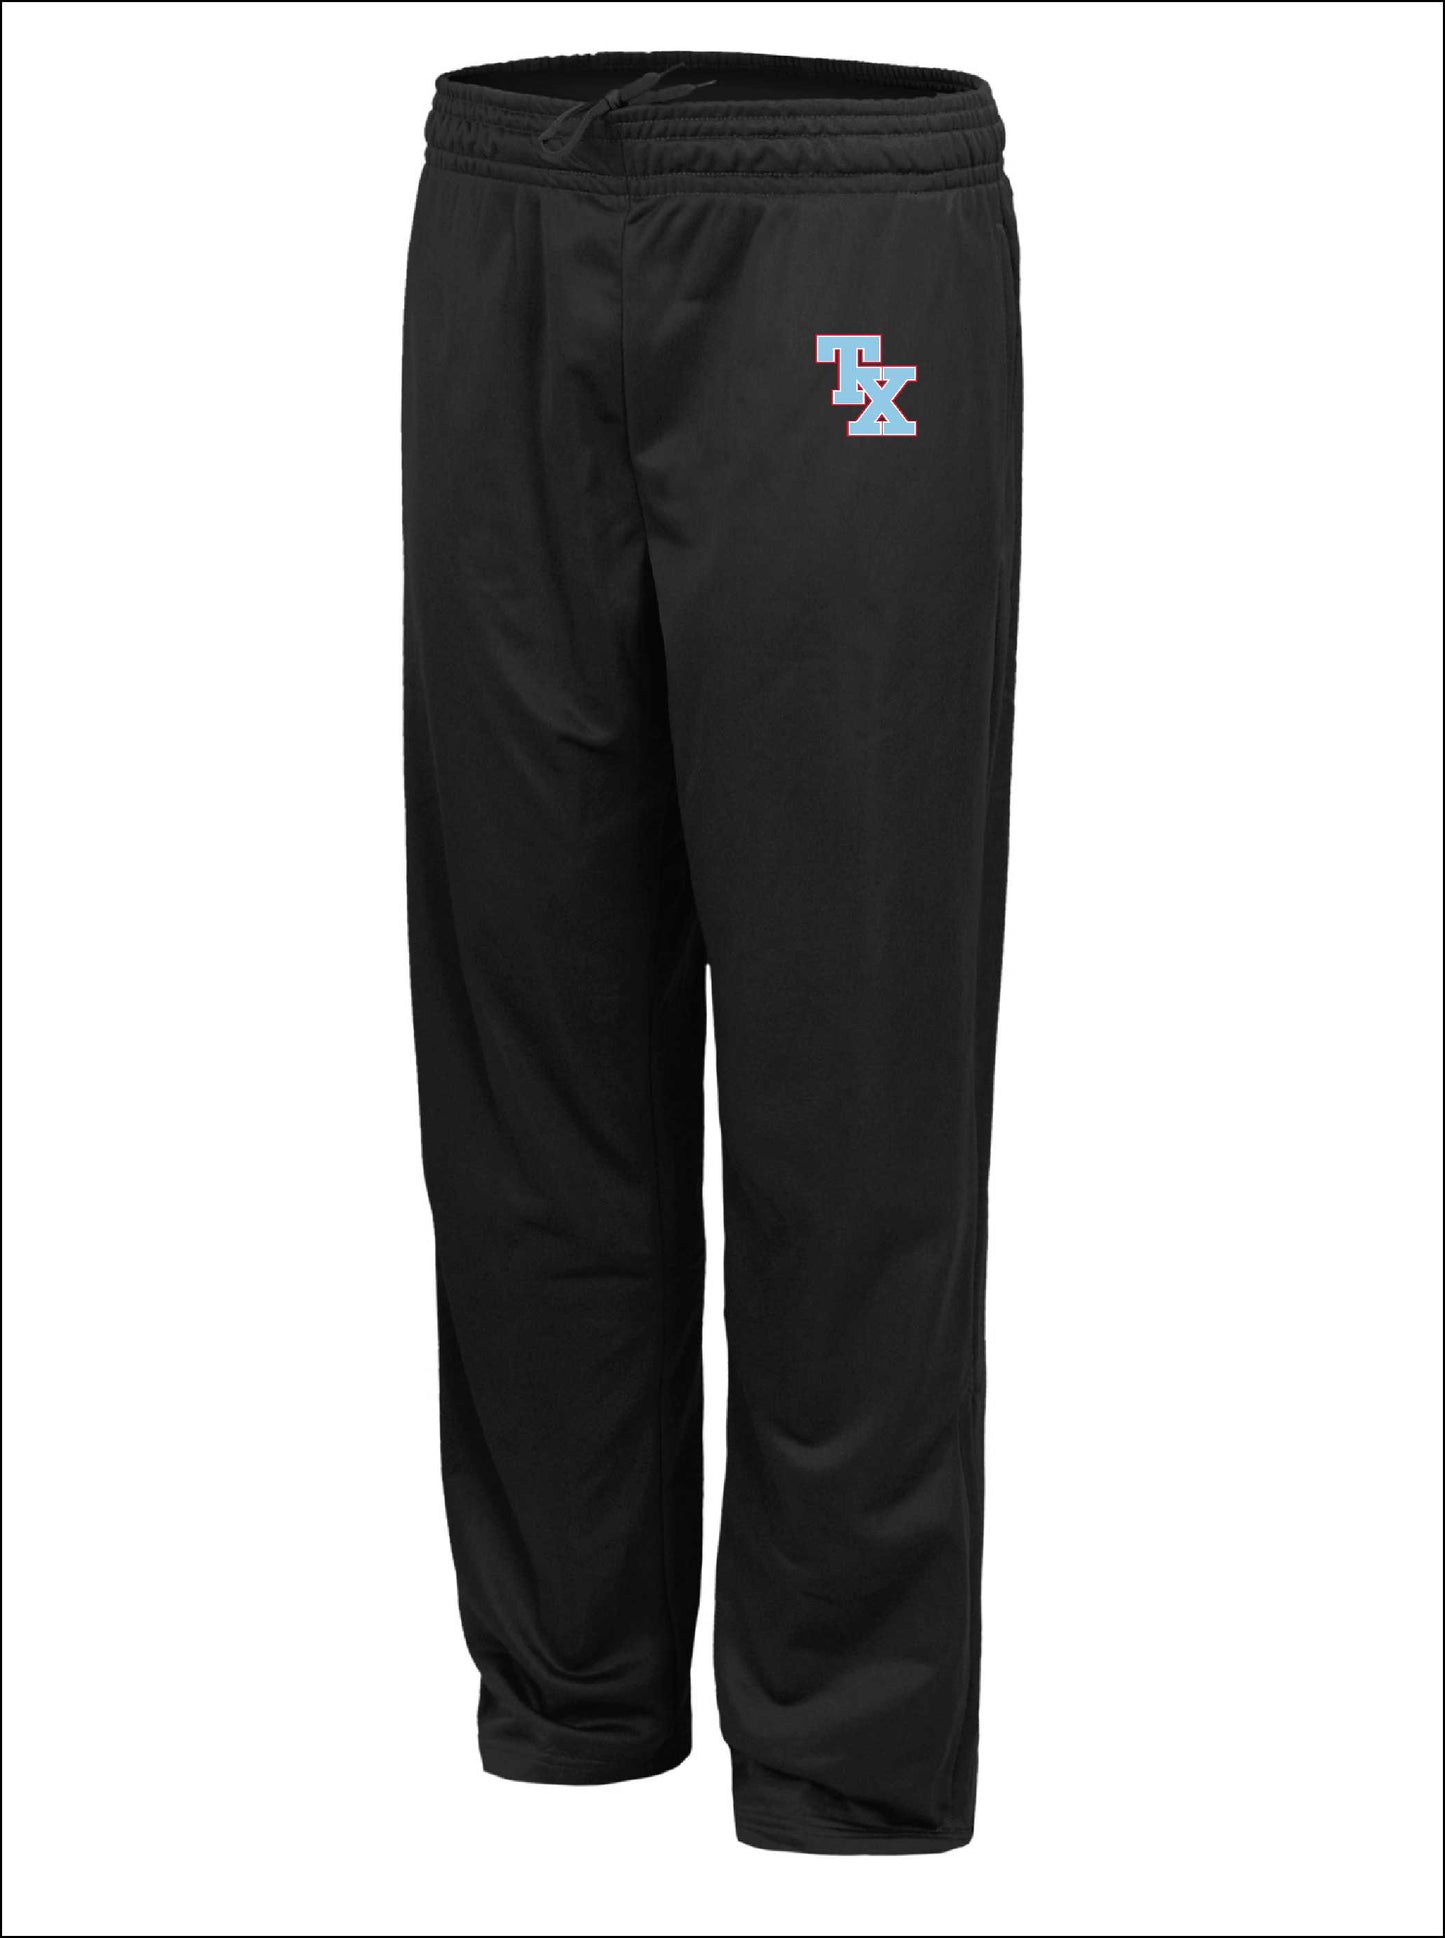 TX BLUES EMBROIDERED SWEATPANTS